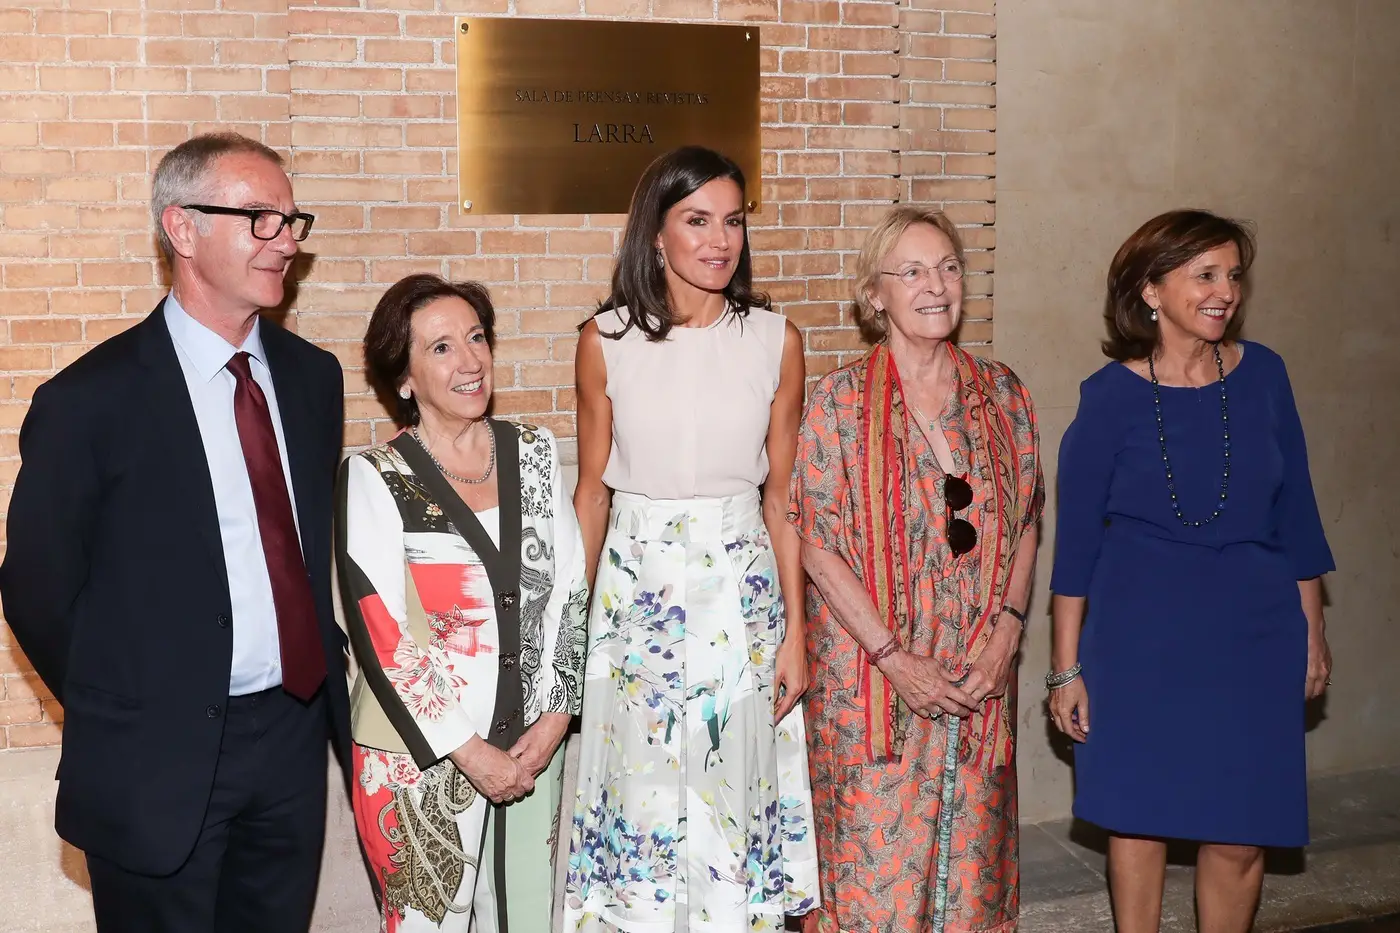 Queen Letizia wore White floral Adoflo Domingues Skirt and Slate Pink sleeveless top for a national Library visit